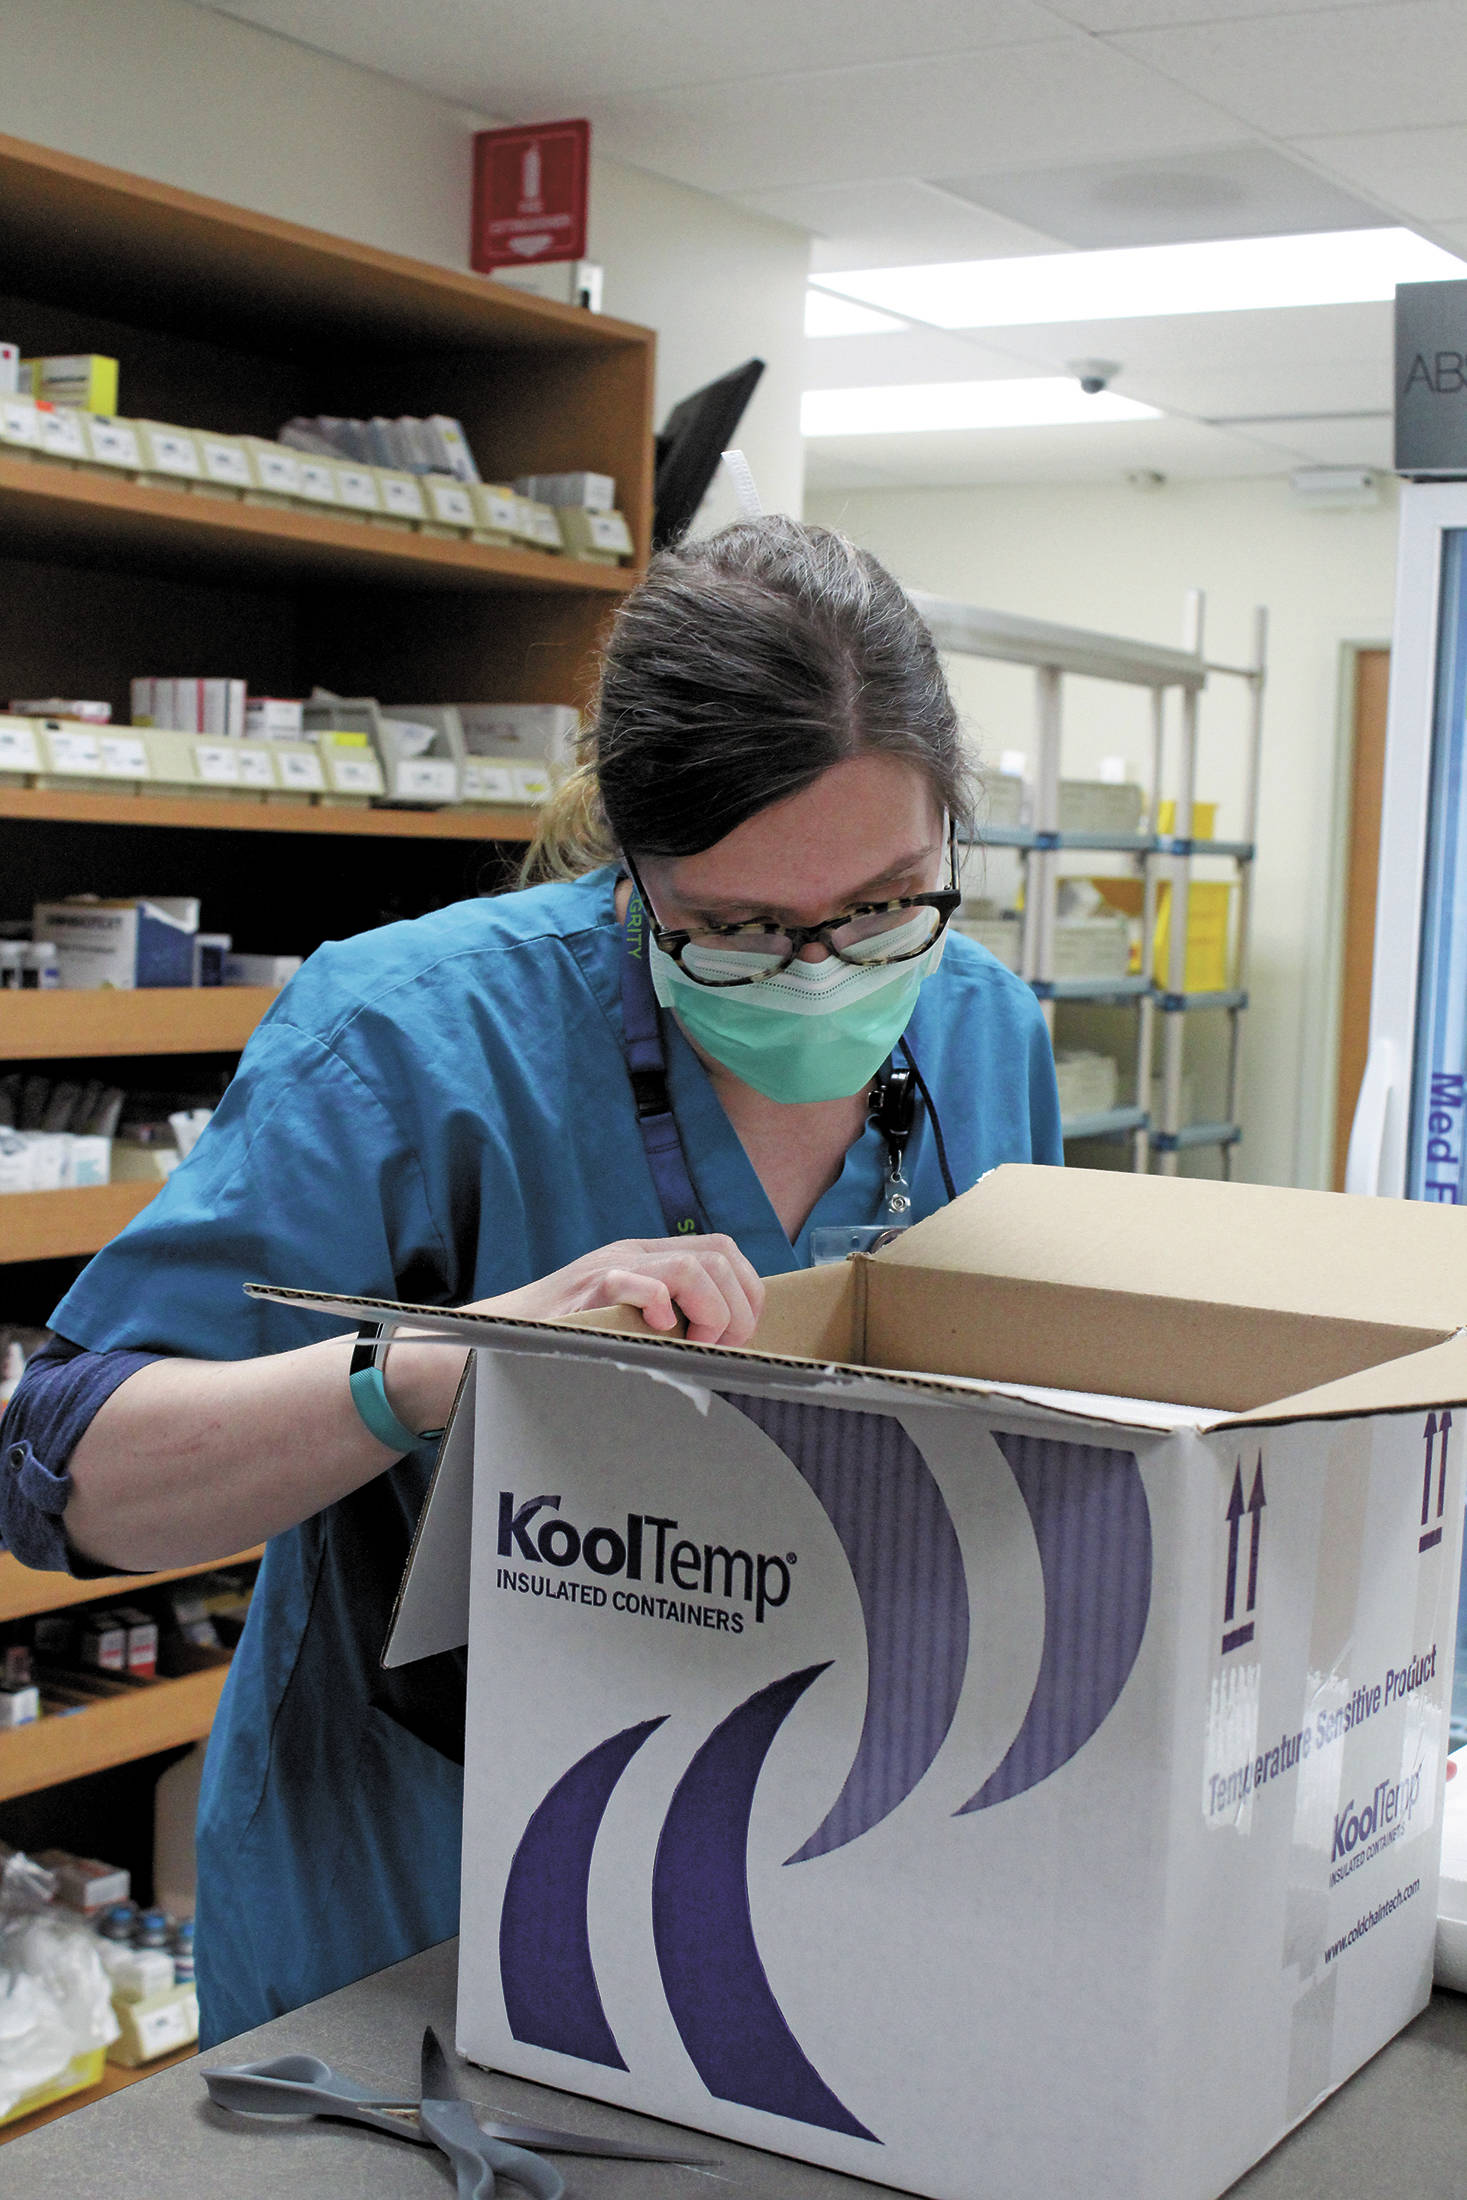 South Peninsula Pharmacist Jill Kort peers into a box filled with 180 doses of the Pfizer vaccine for COVID-19 shortly after it arrived at the hospital on Wednesday, Dec. 16, 2020 in Homer, Alaska. (Photo by Megan Pacer/Homer News)